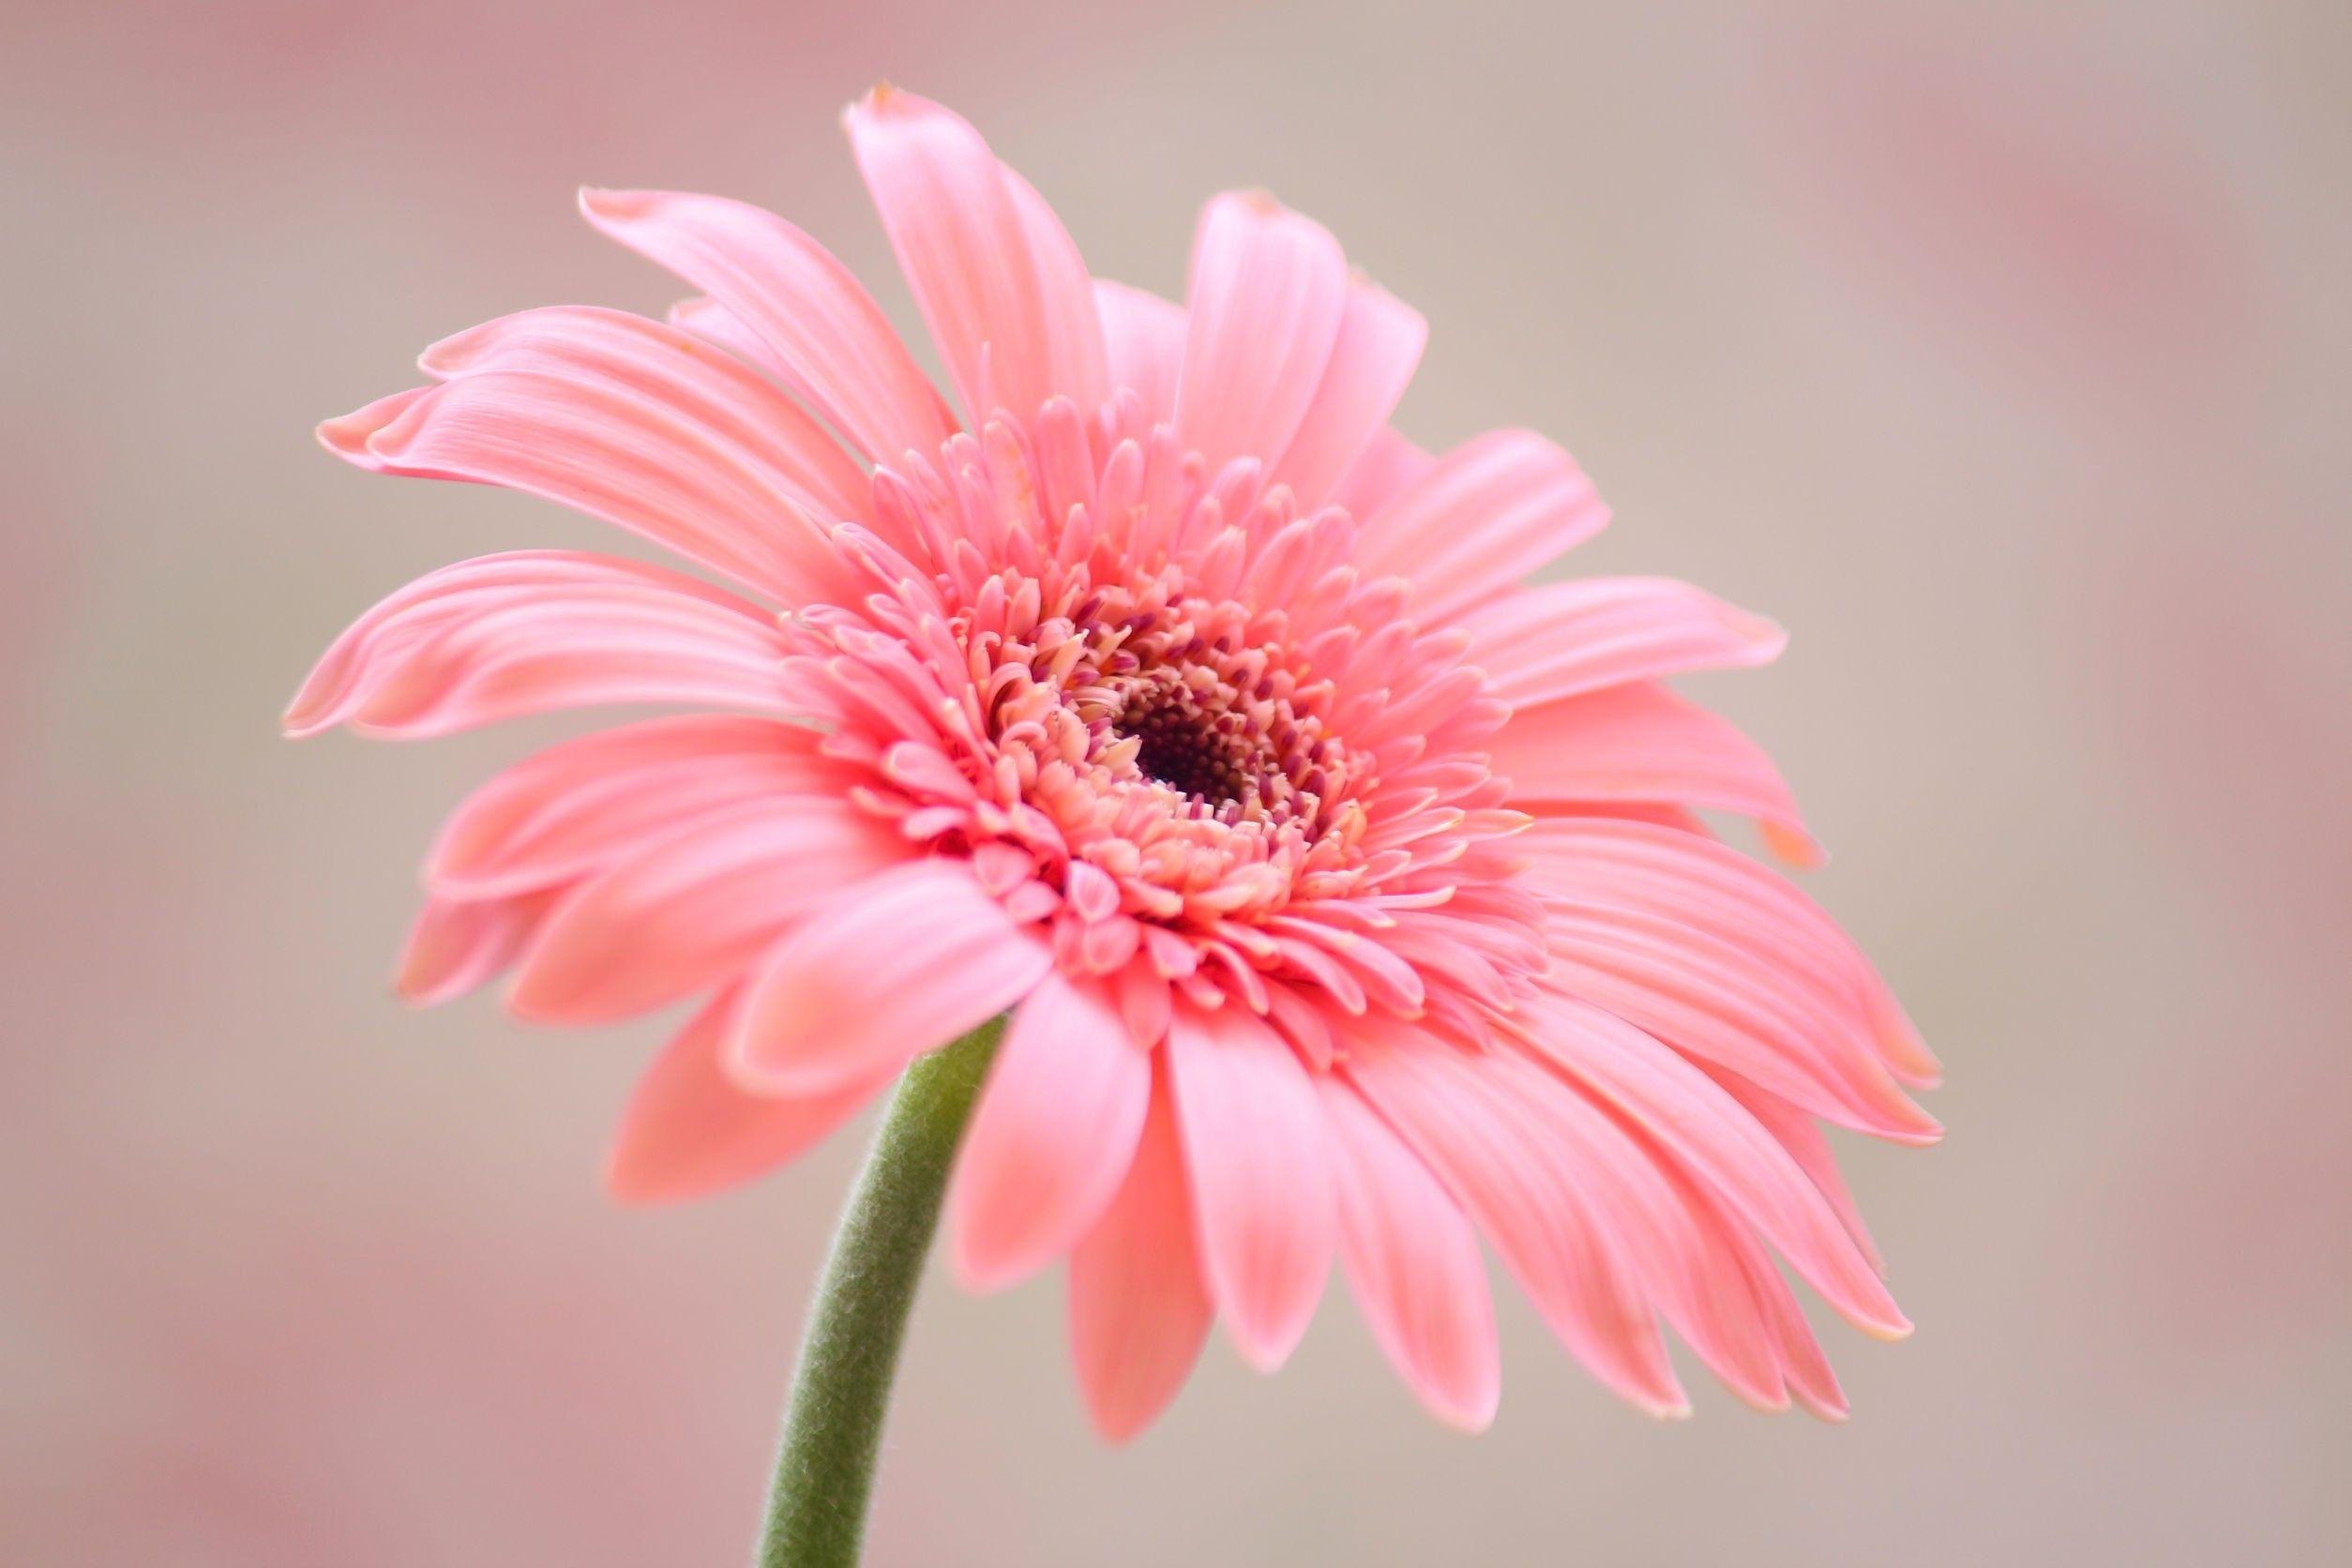 Pastel Flower Wallpapers - Top Free Pastel Flower Backgrounds